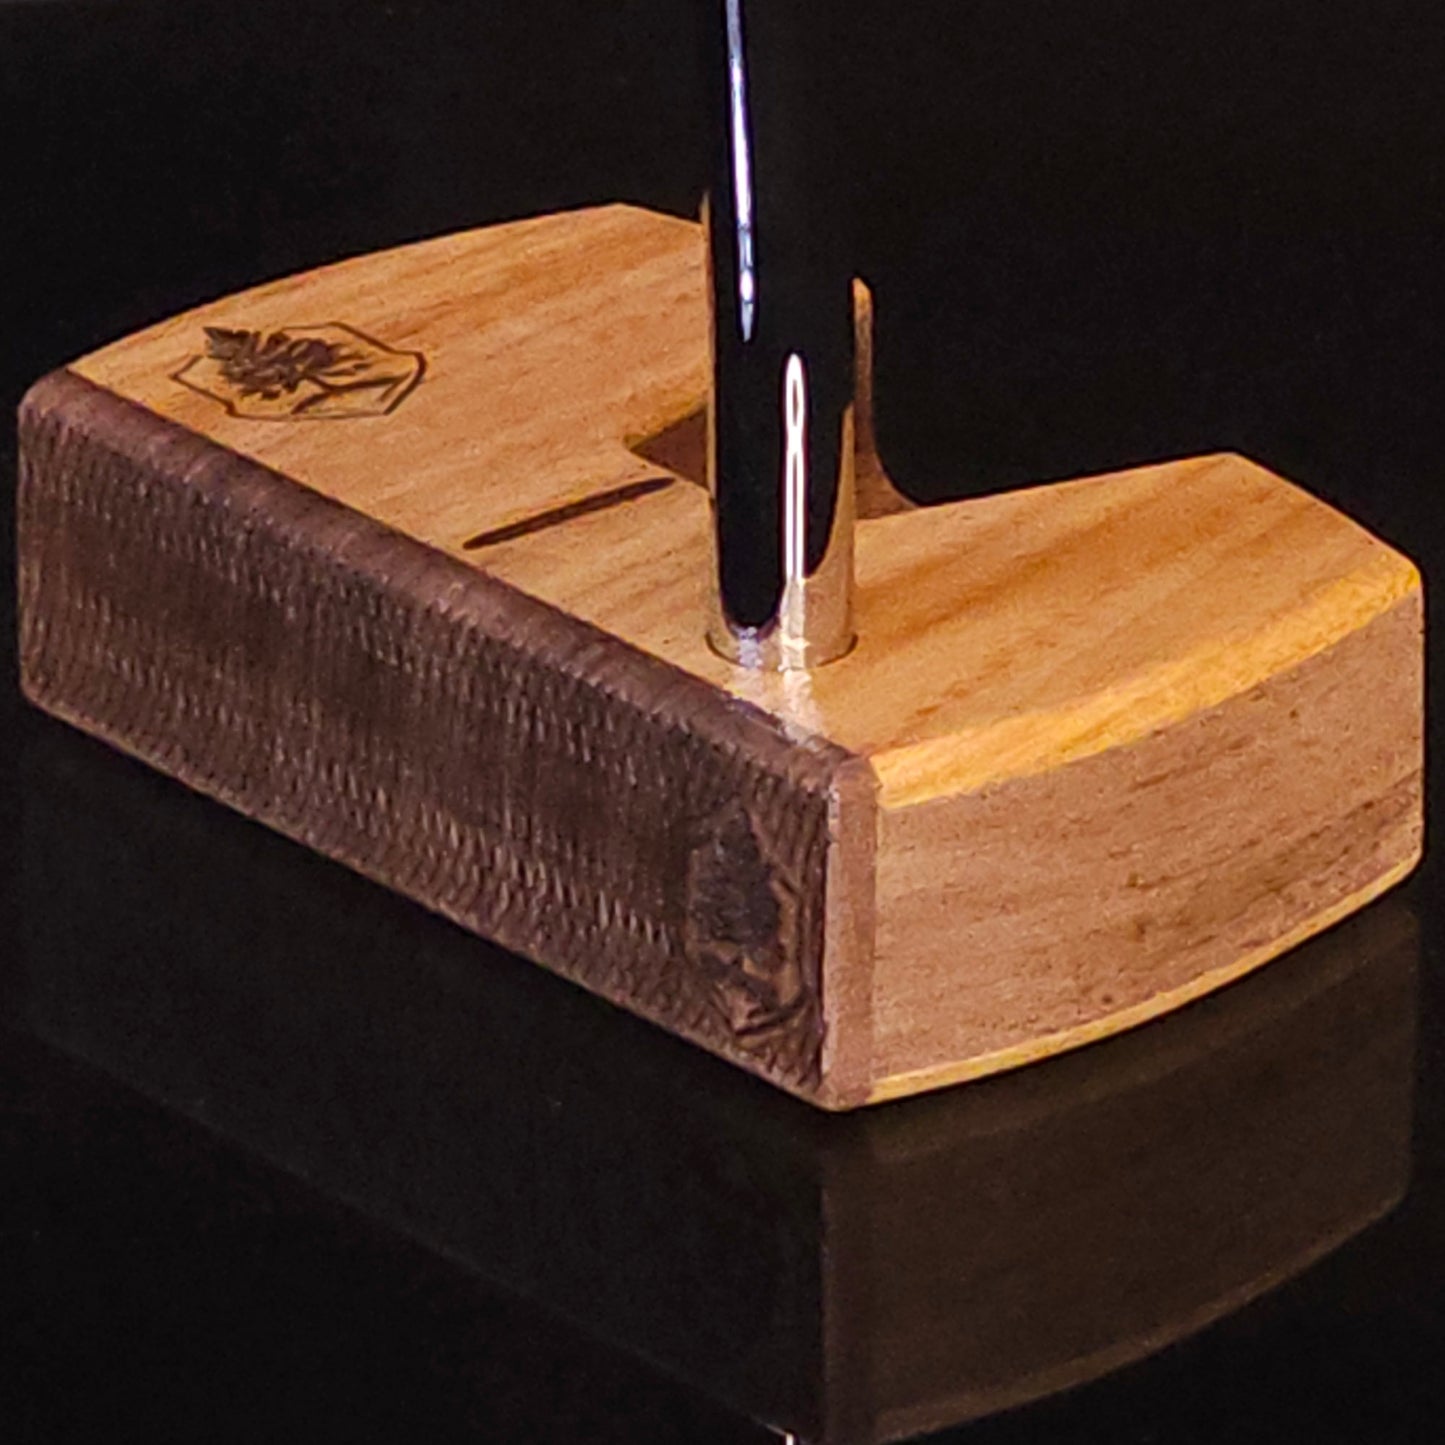 Canarywood walnut and bolivian rosewood Woodrich Regal wood putter